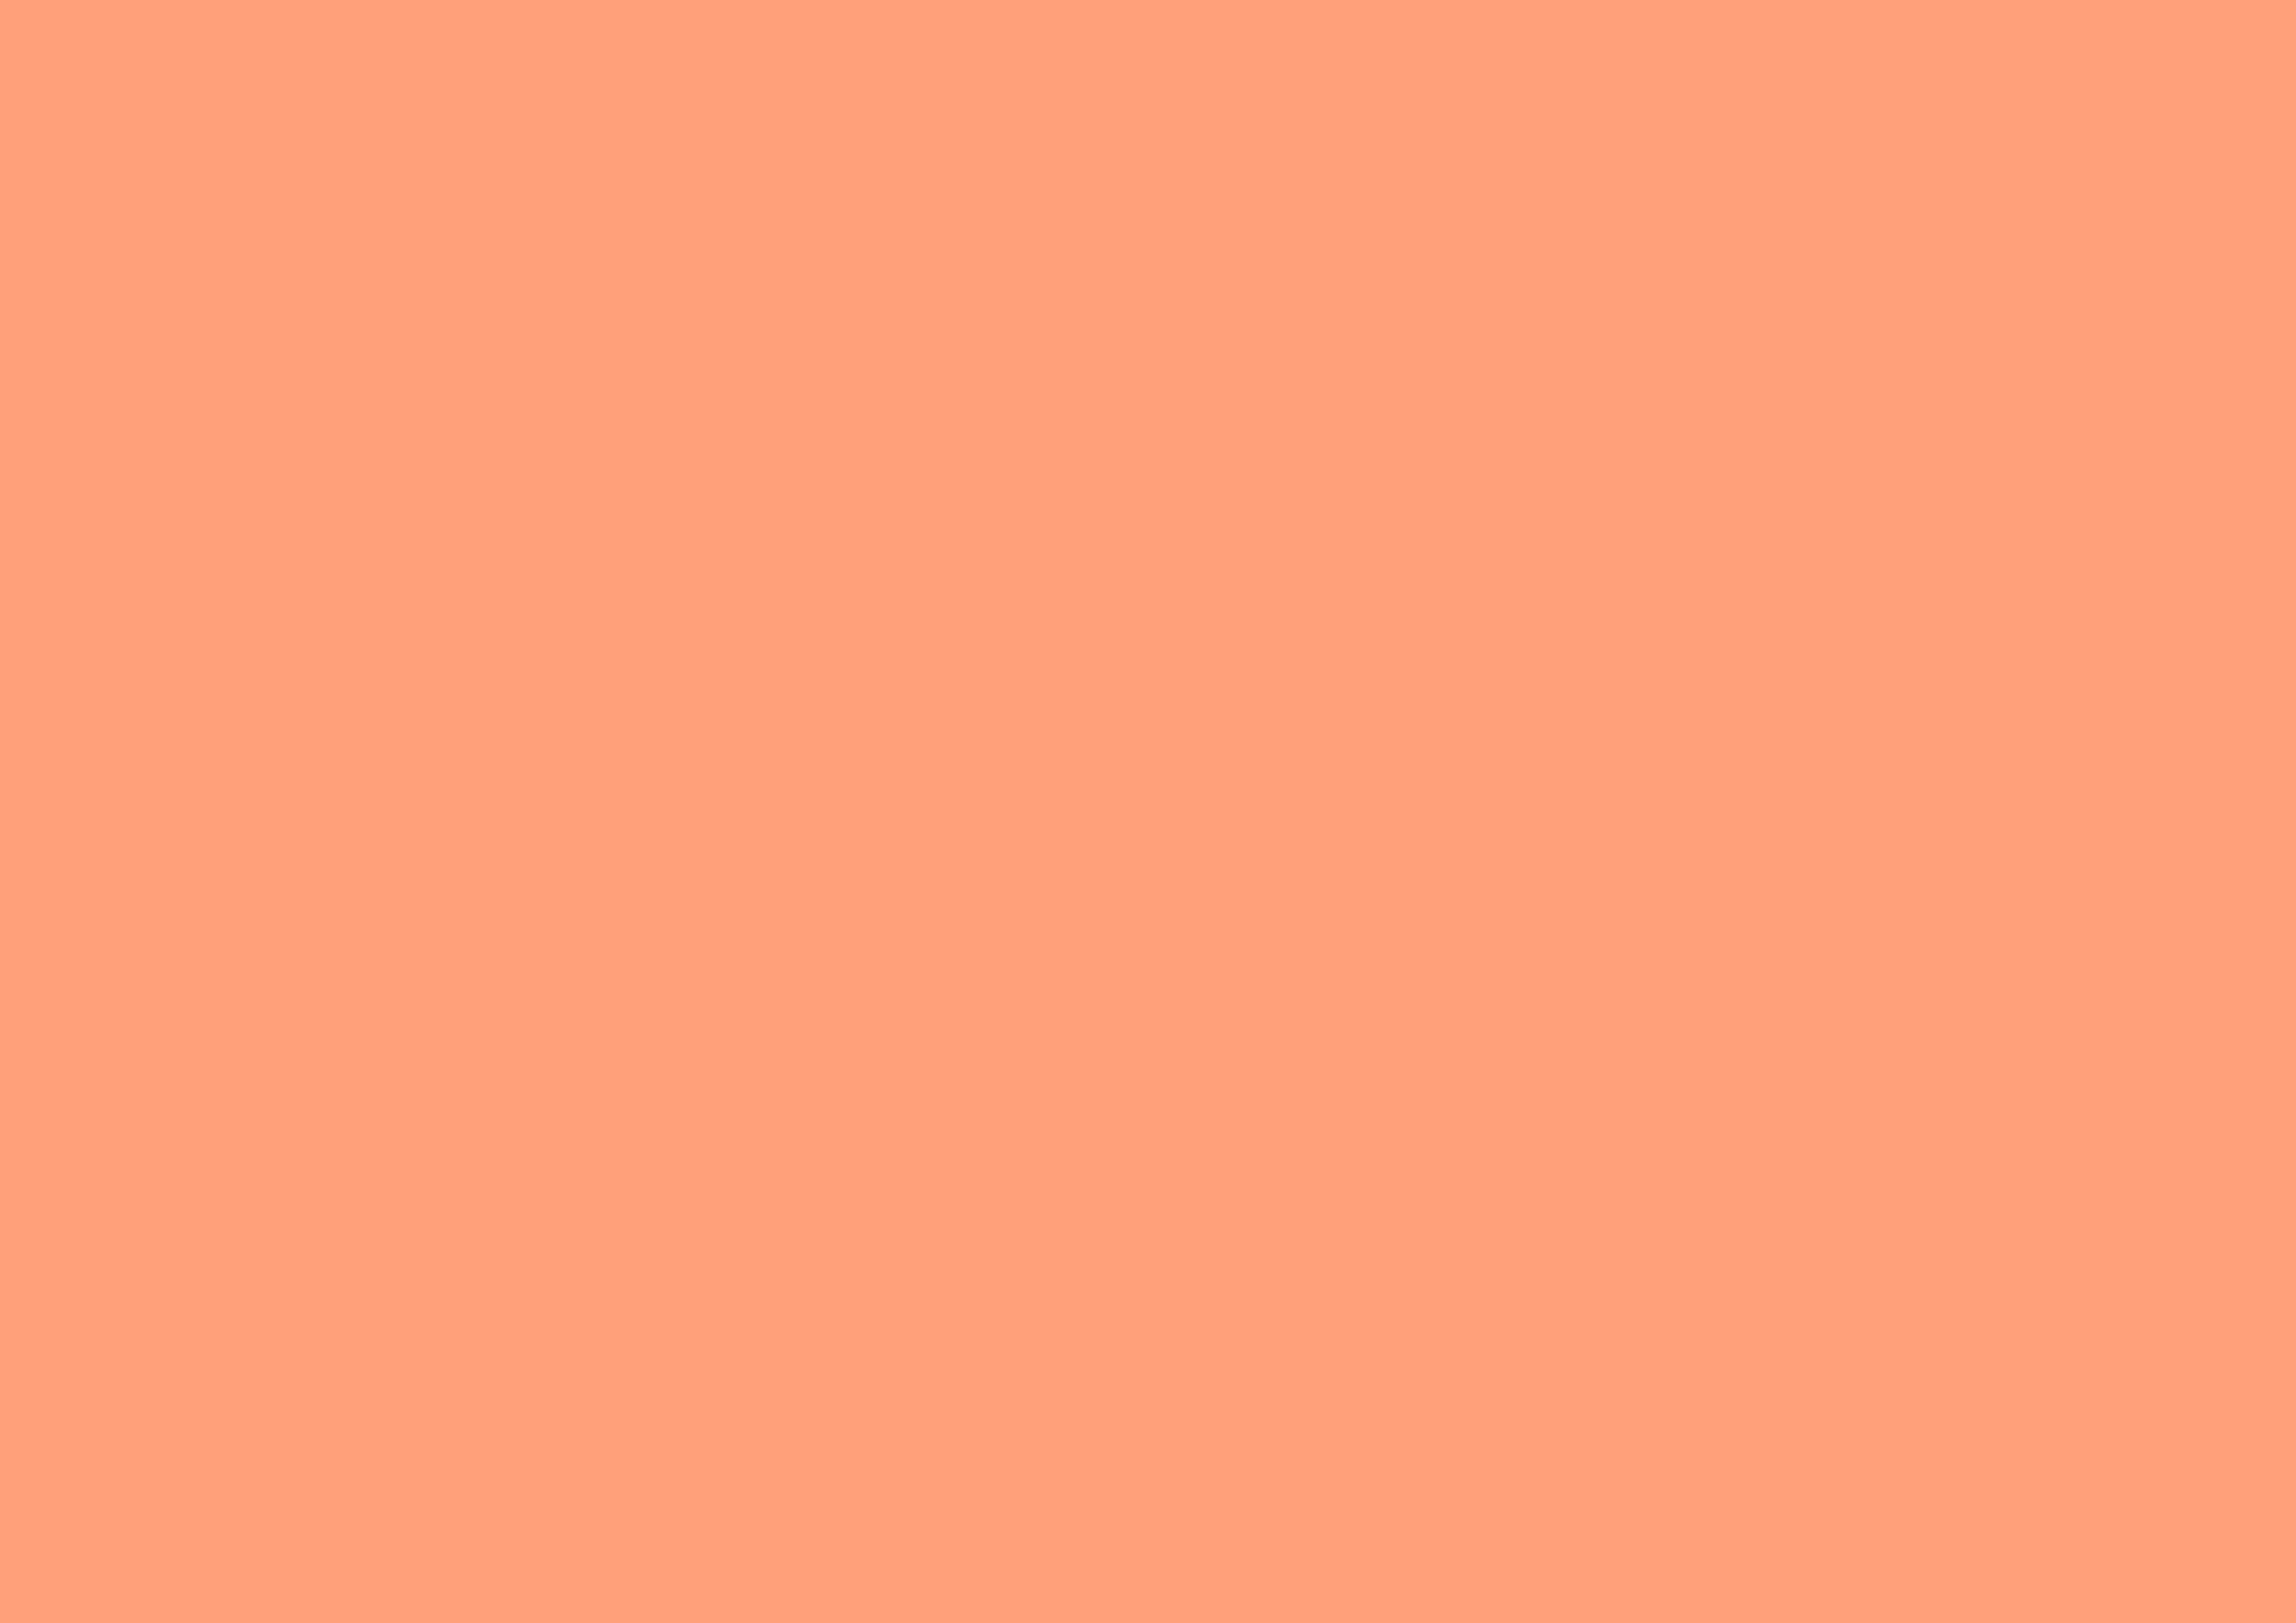 3508x2480 Light Salmon Solid Color Background